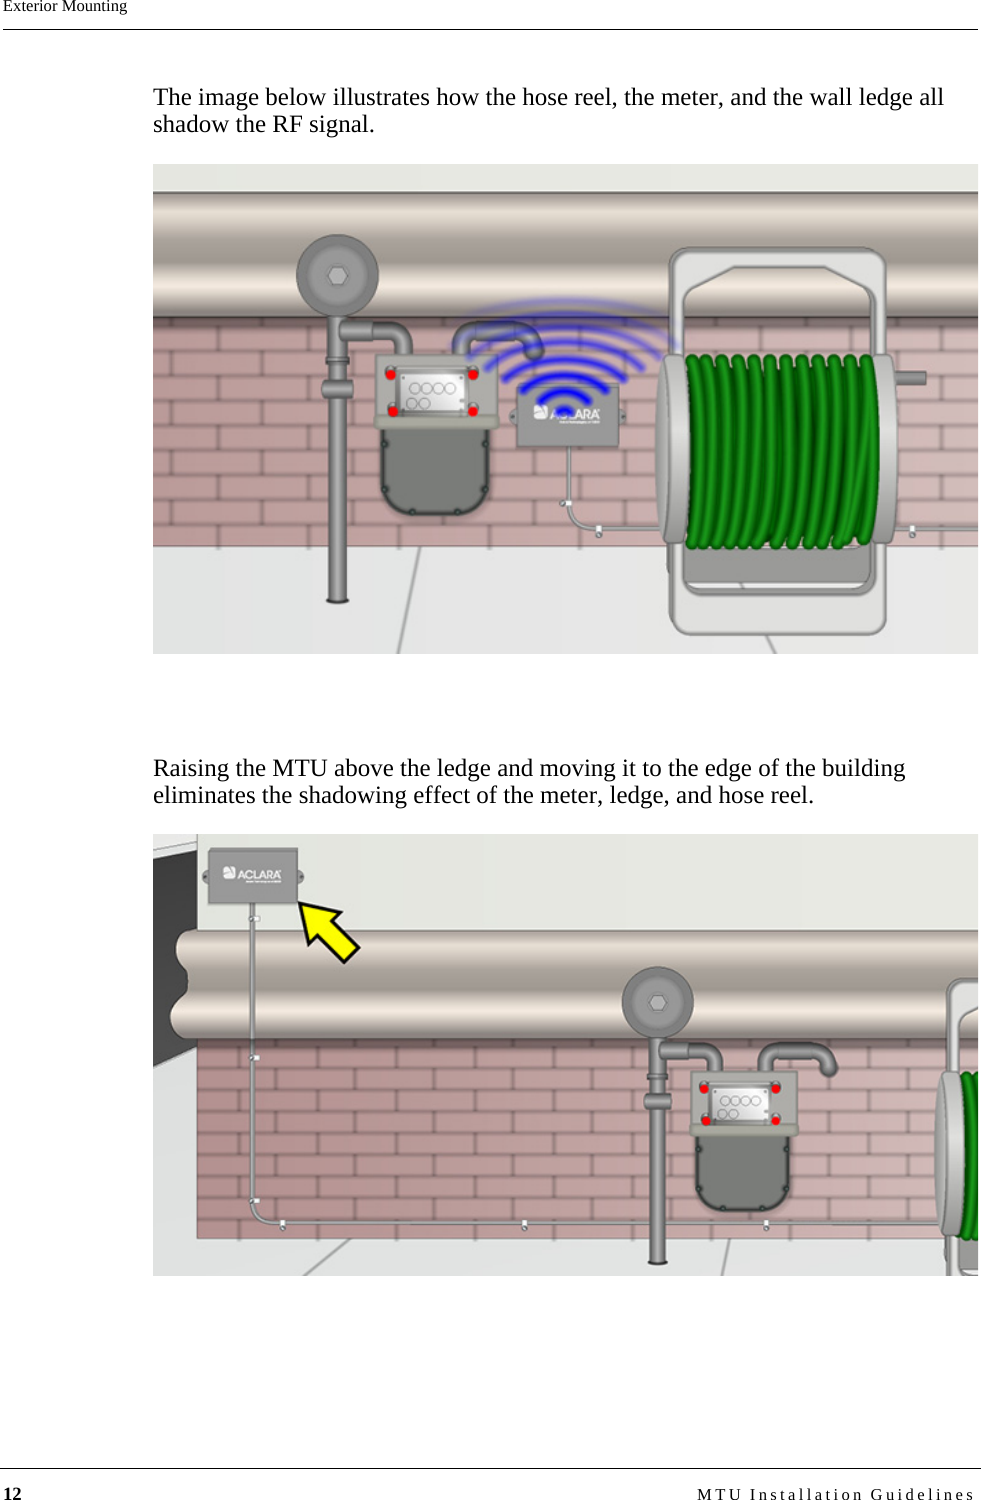 12 MTU Installation GuidelinesExterior MountingThe image below illustrates how the hose reel, the meter, and the wall ledge all shadow the RF signal.Raising the MTU above the ledge and moving it to the edge of the building eliminates the shadowing effect of the meter, ledge, and hose reel.